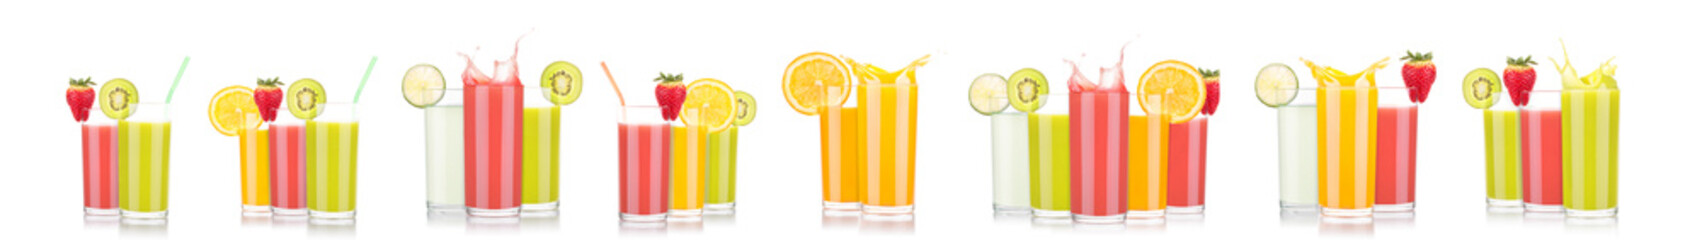 Colorful Summer Drinks with Fruits for a festive touch at your party or barbecue